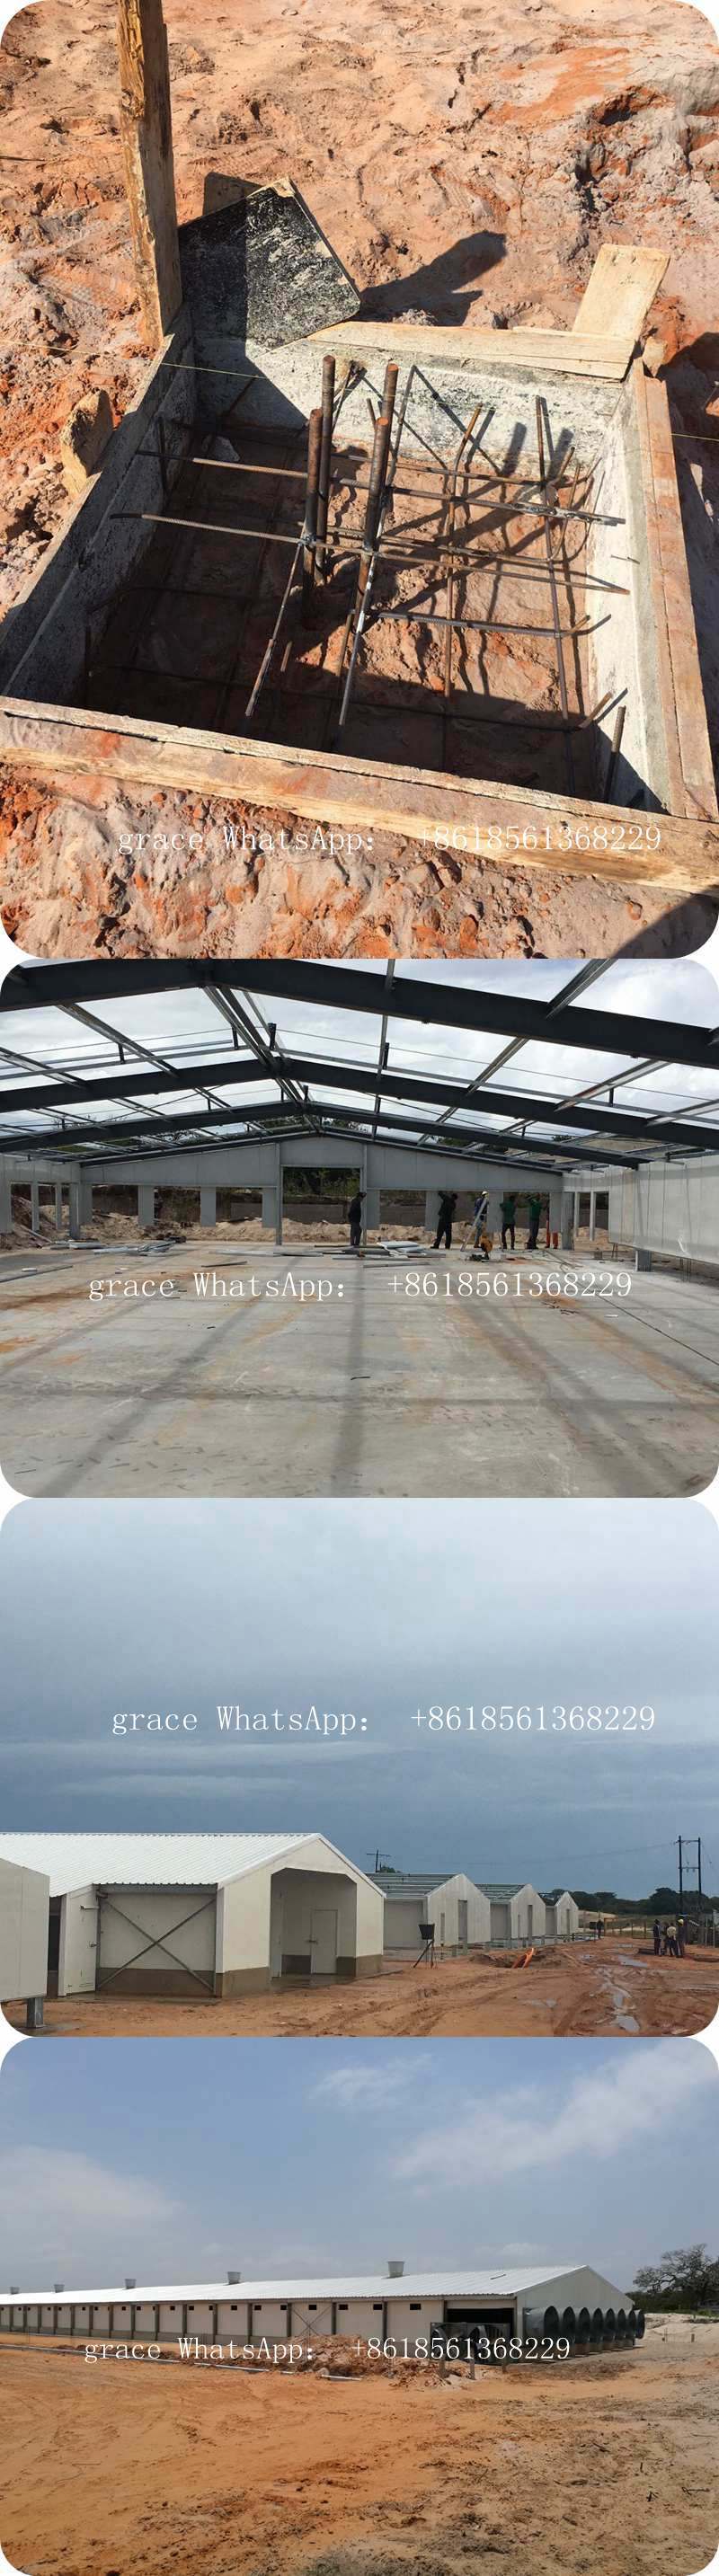 Good Quality Automatic Poultry Farm Machinery with Matching Prefab Shed Construction